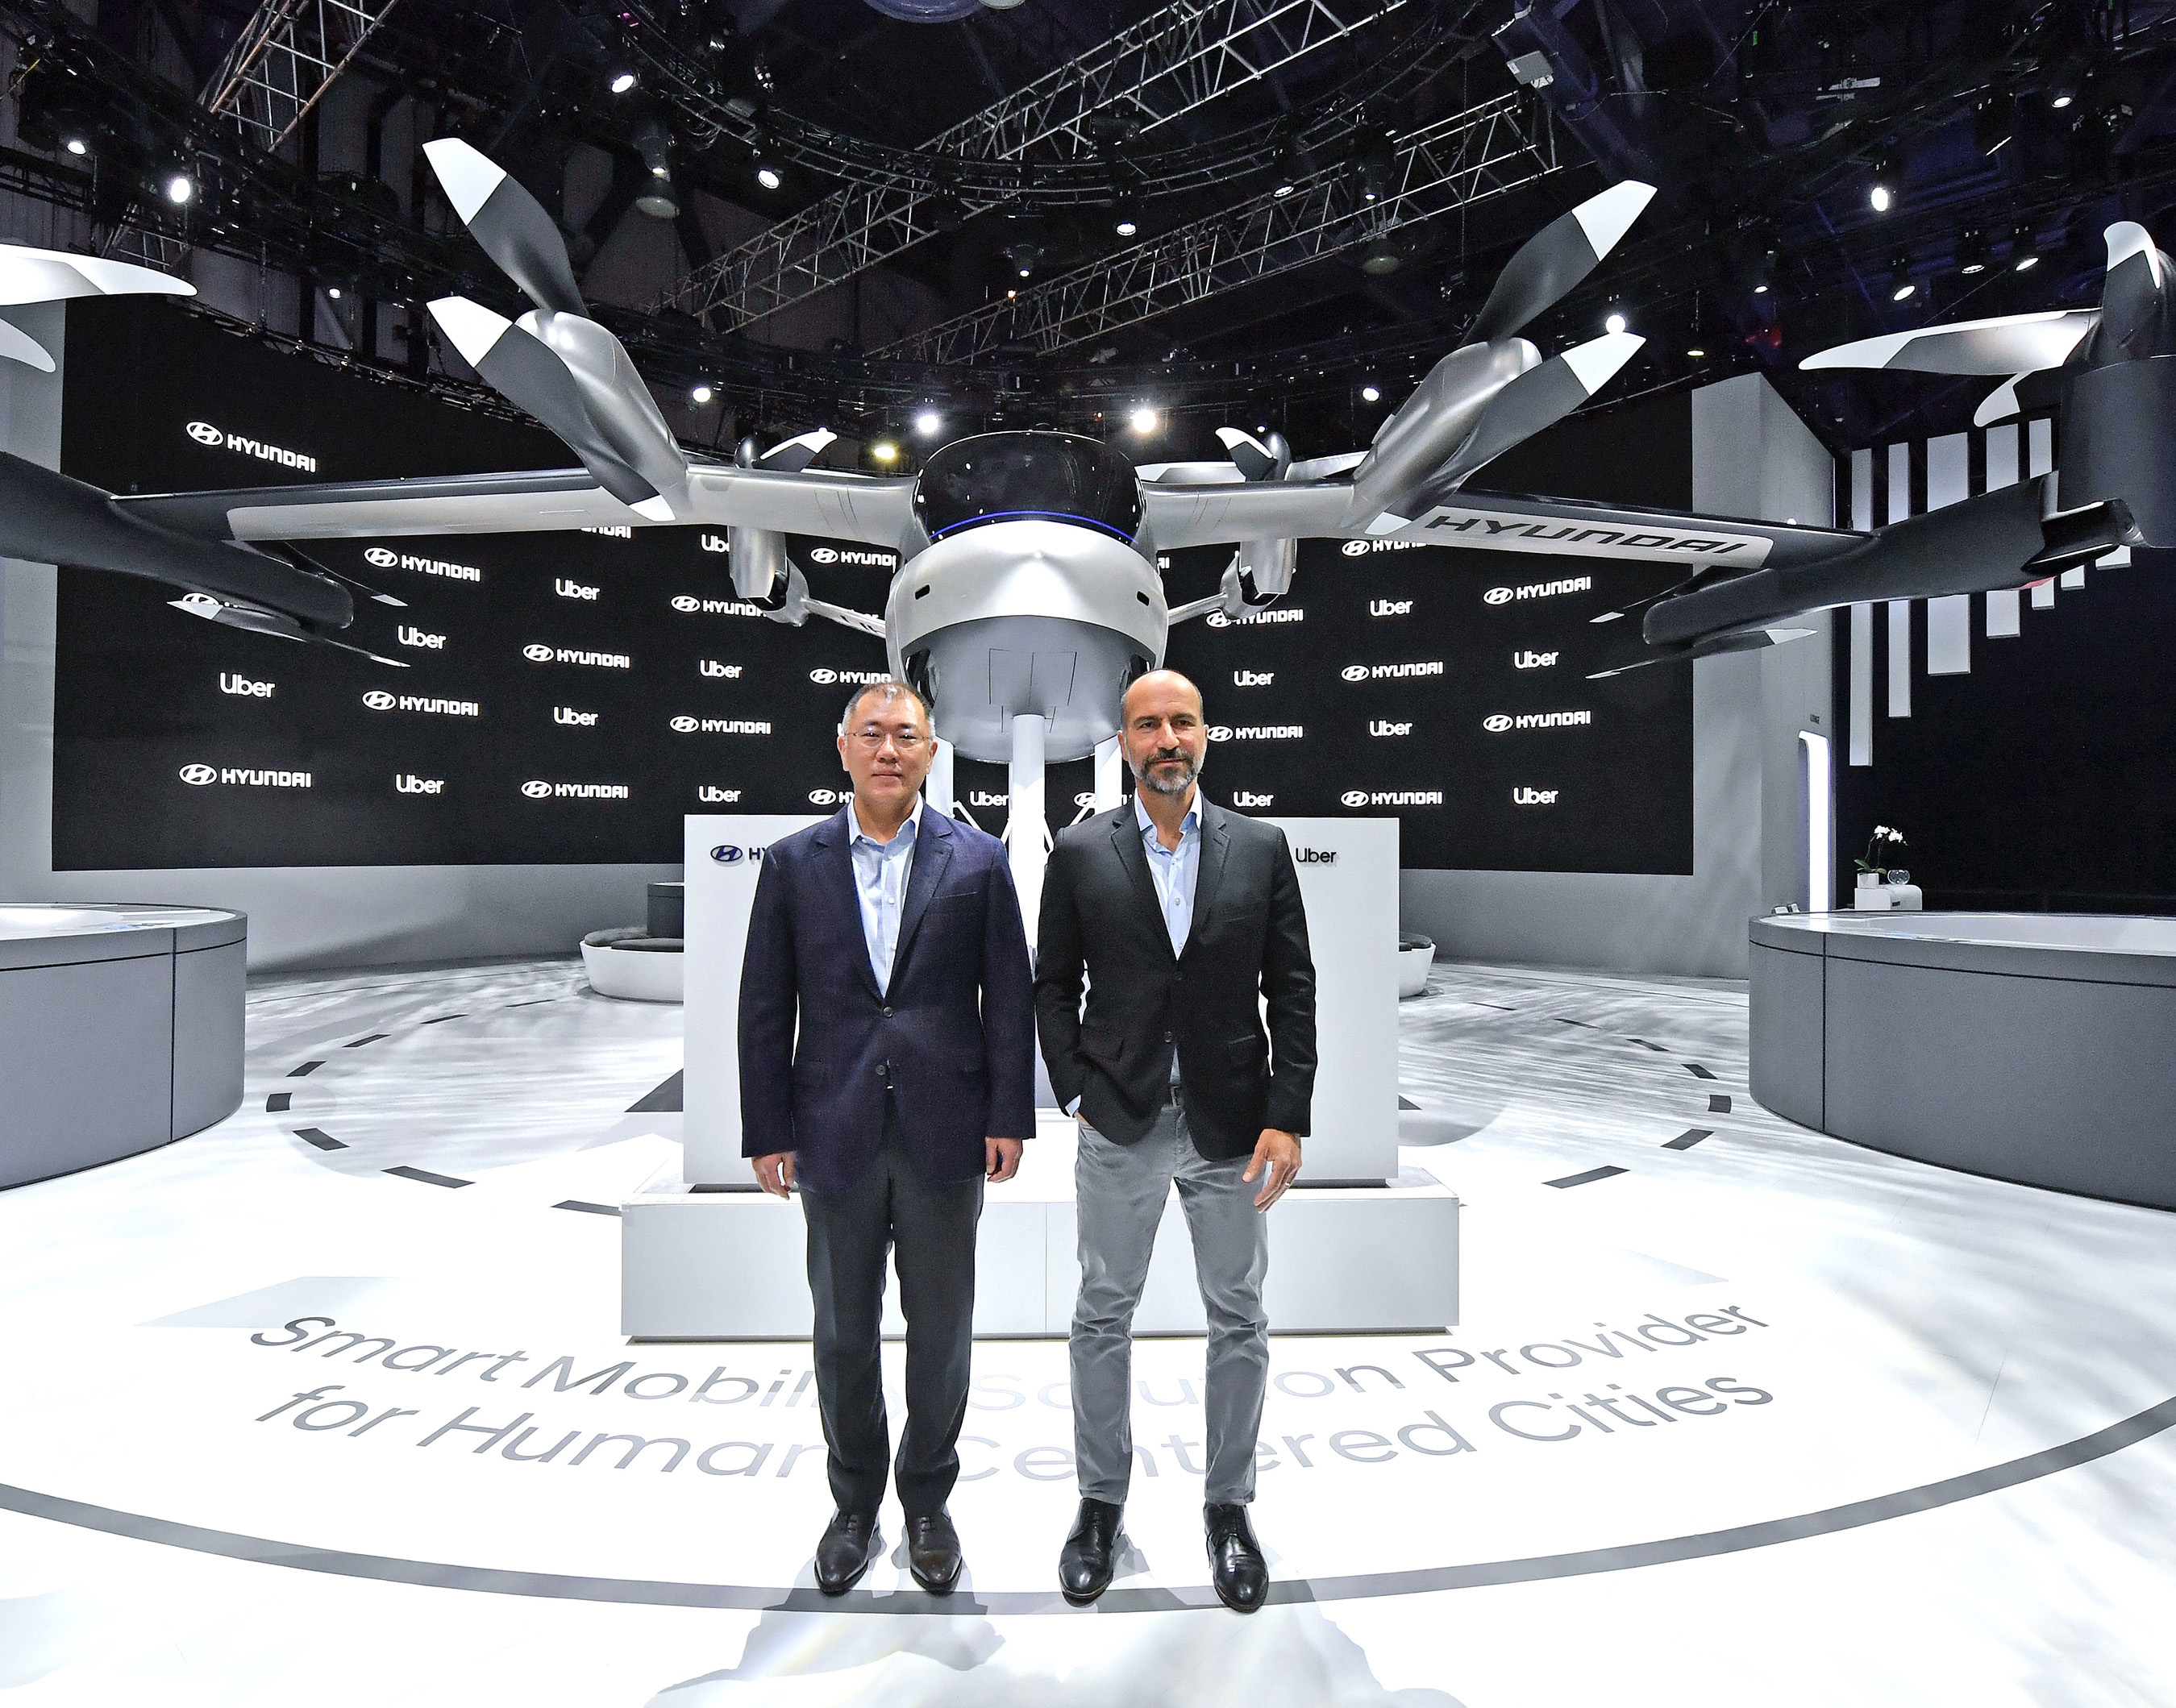 Hyundai Motor Company and Uber have announced a new partnership to develop Uber Air Taxis for a future aerial ride share network and unveiled a new full-scale aircraft concept at CES 2020. From left to right: Euisun Chung, Executive Vice Chairman of Hyundai Motor Group / Dara Khosrowshahi, CEO of Uber